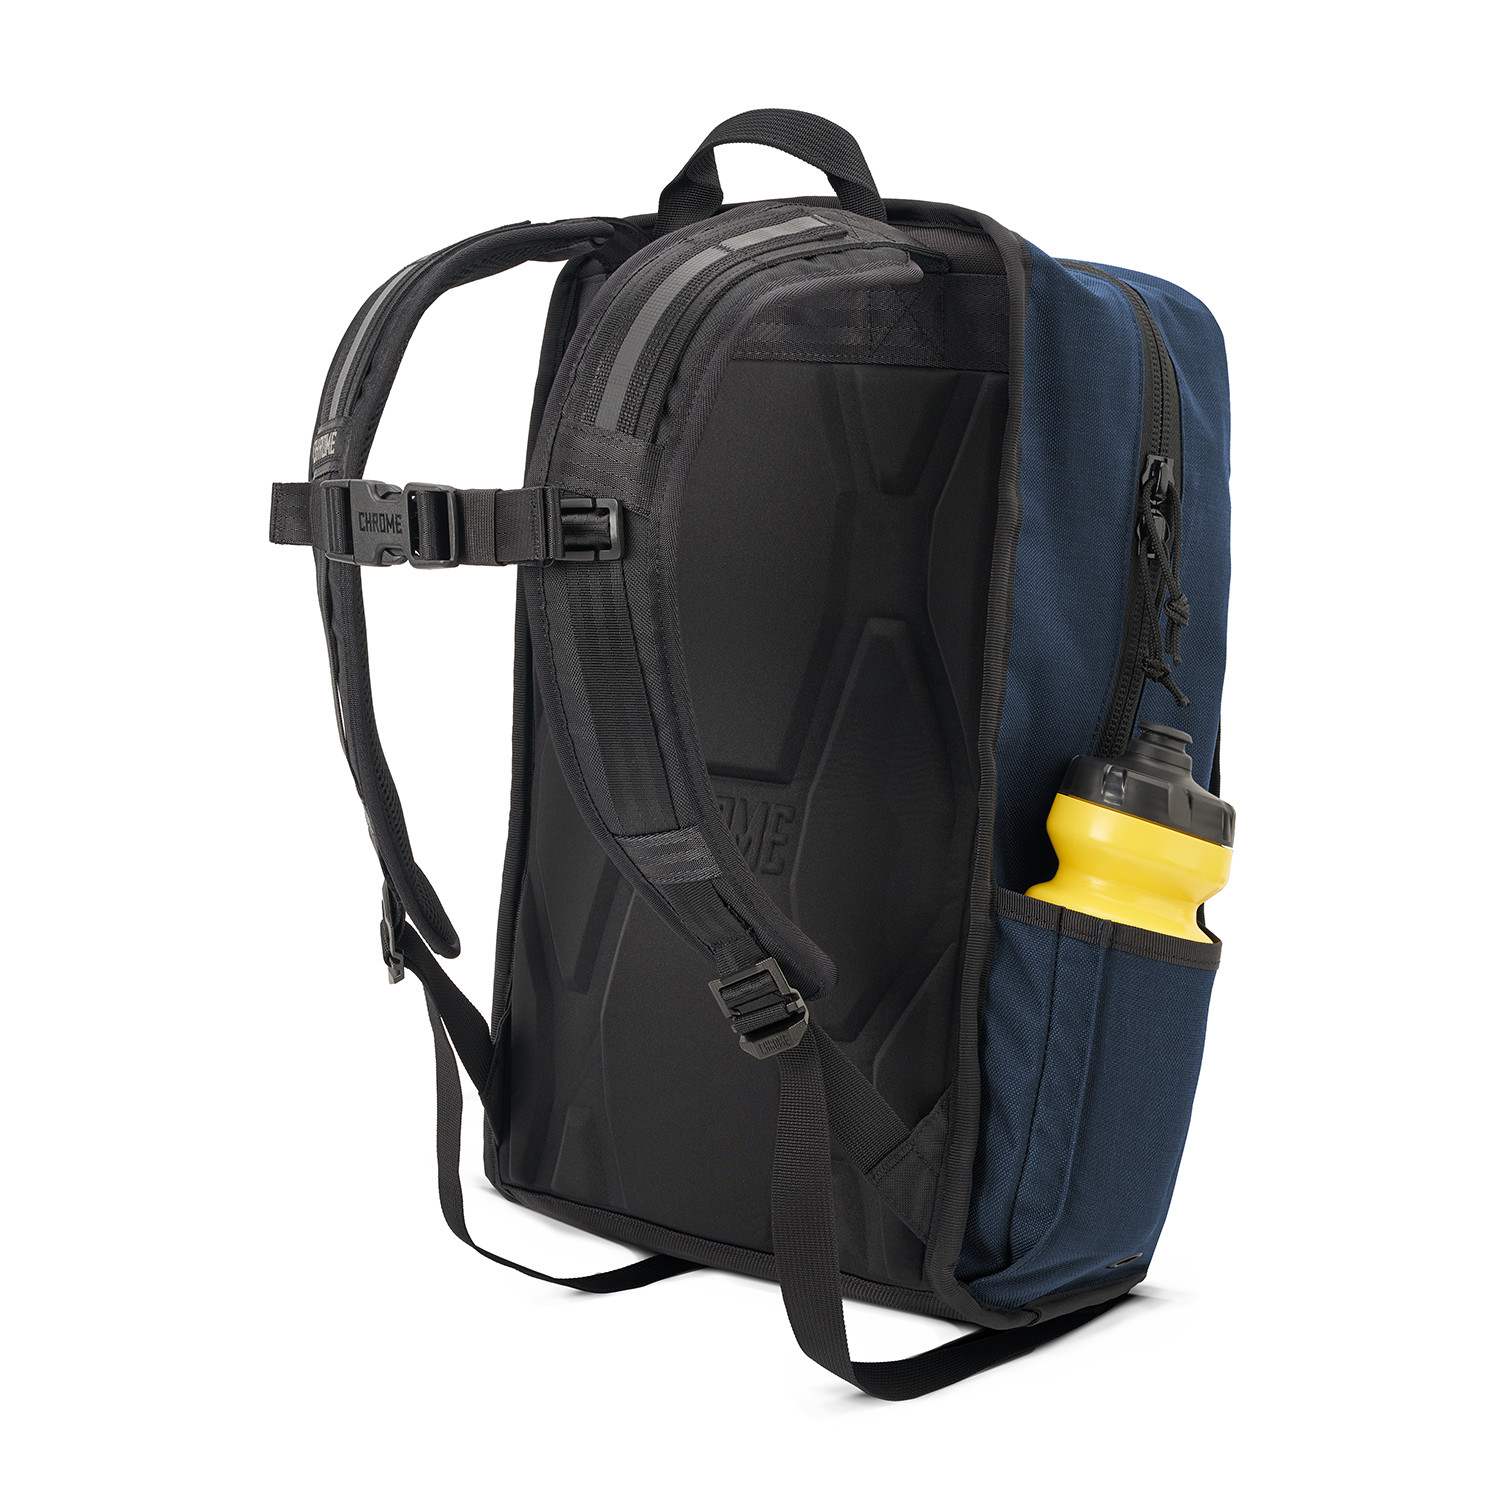 Hondo Backpack // Navy Blue - Chrome Industries - Touch of Modern